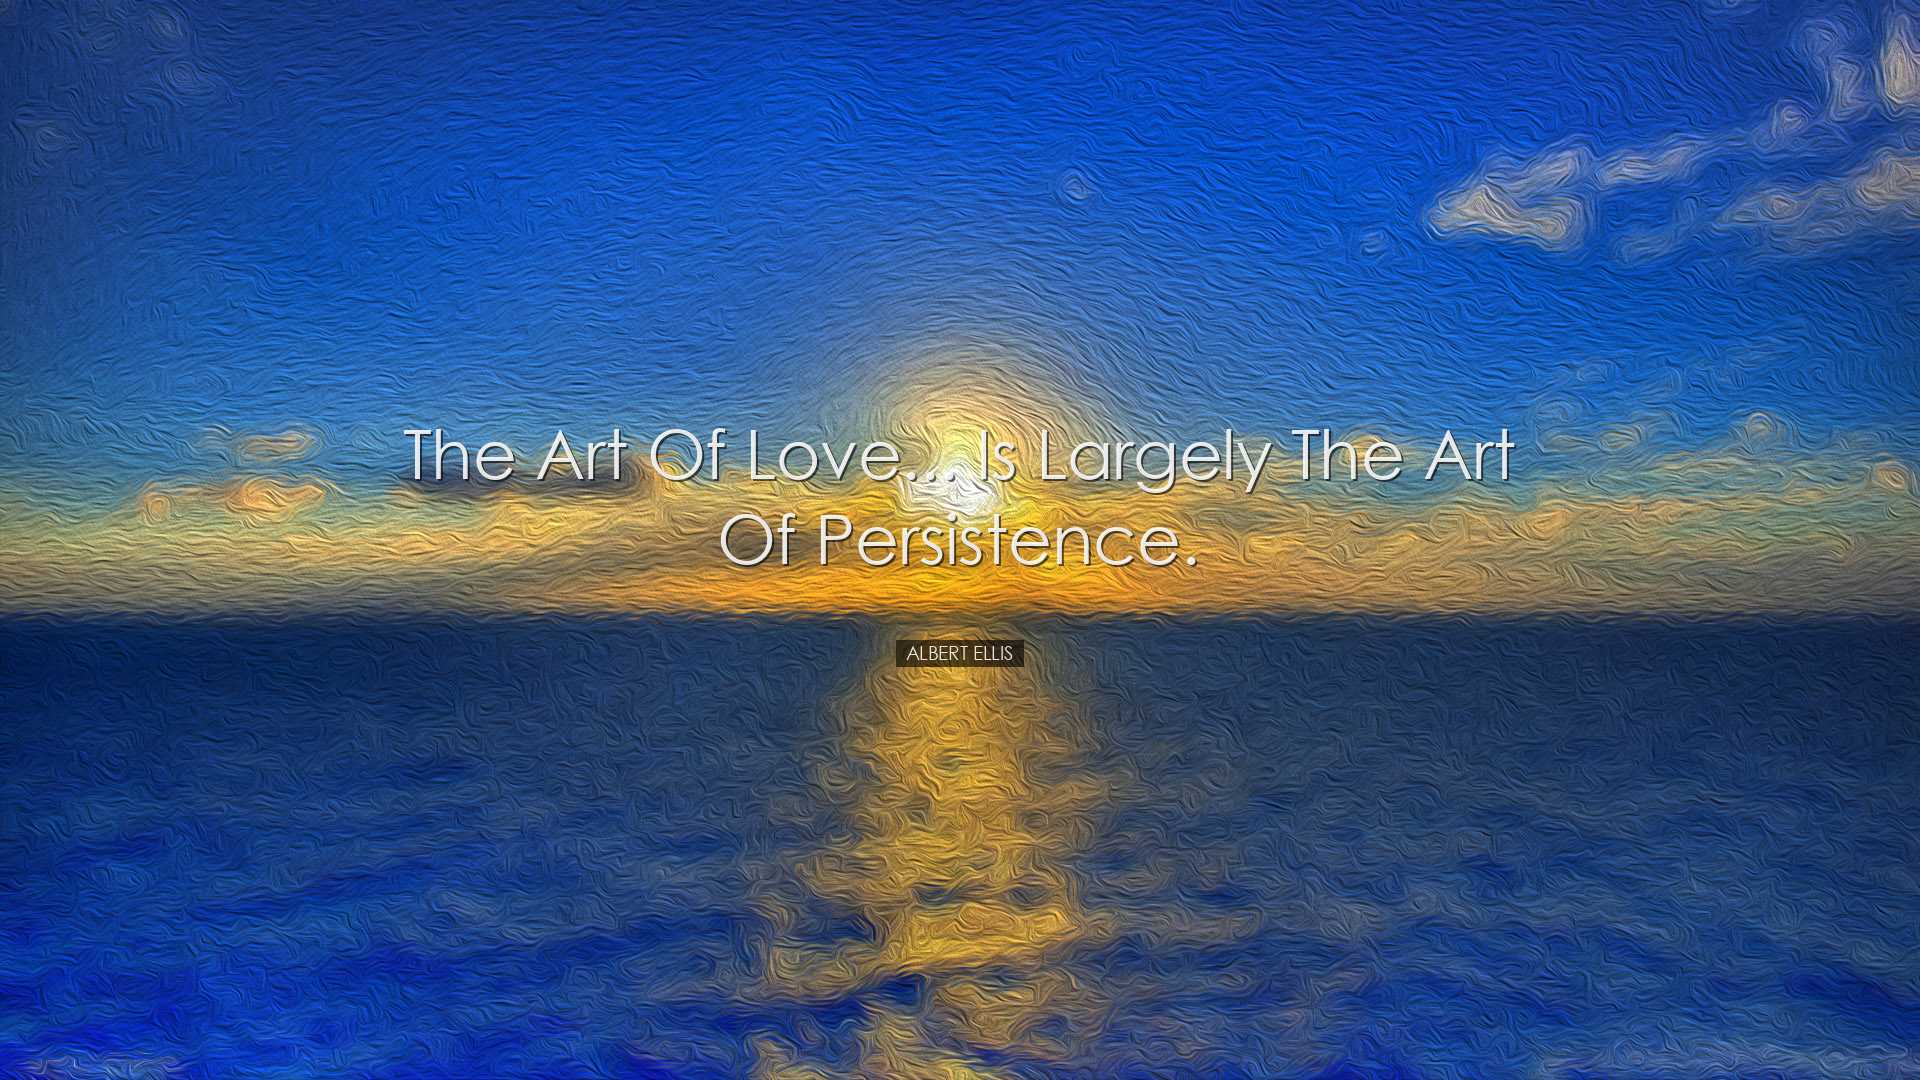 The art of love... is largely the art of persistence. - Albert Ell